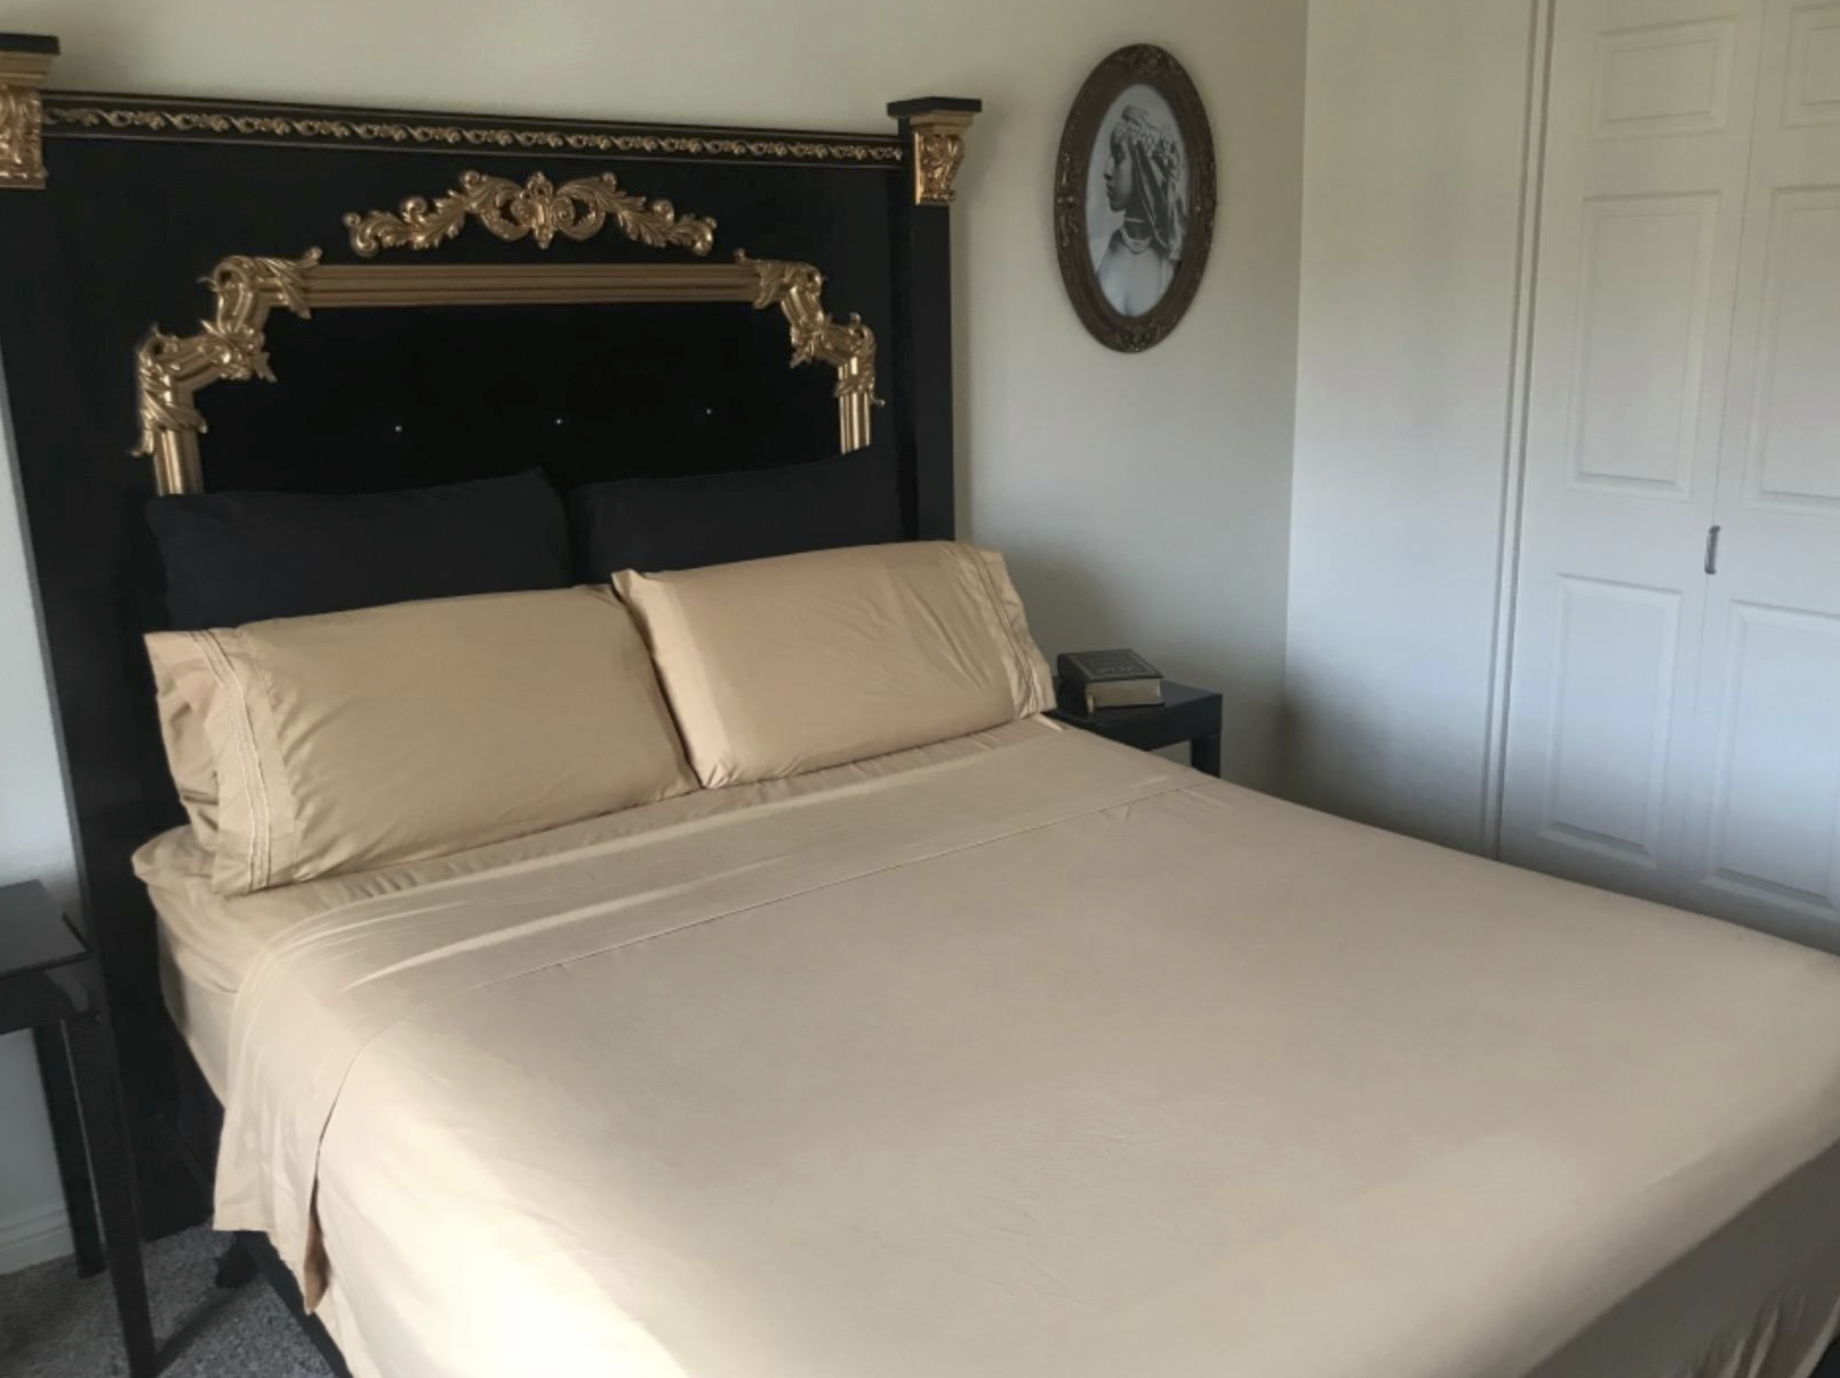 tan sheets and pillows with matching cases on a black and gold bed